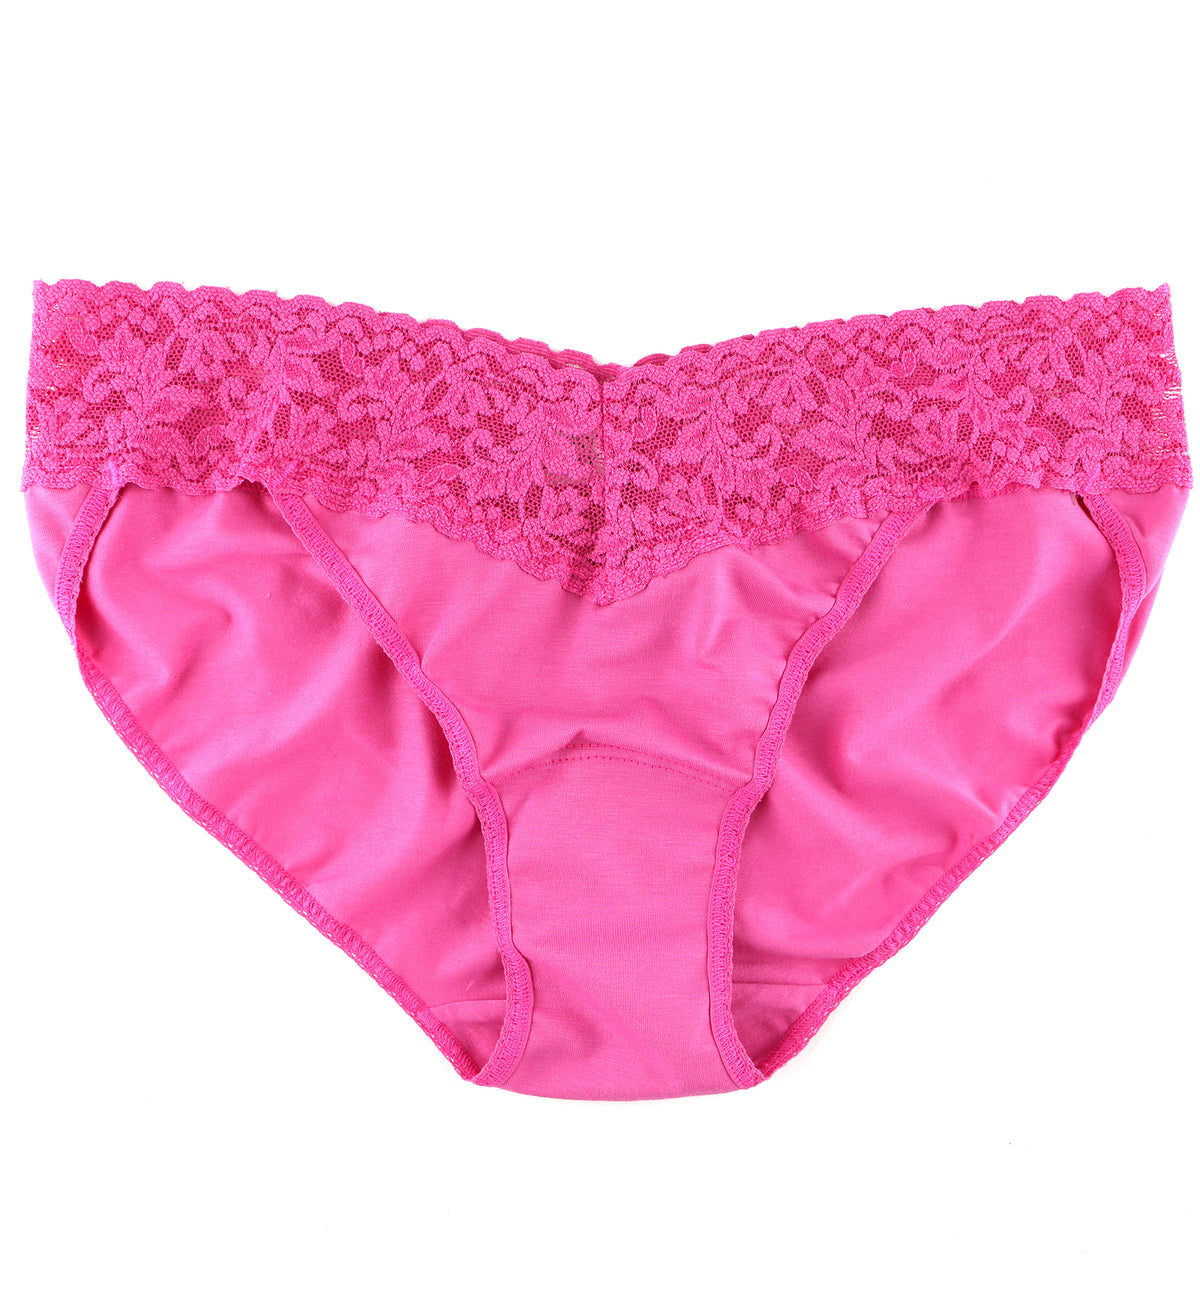 Hanky Panky Organic Cotton V-kini with Lace (892201),Small,Wild Pink - Wild Pink,Small